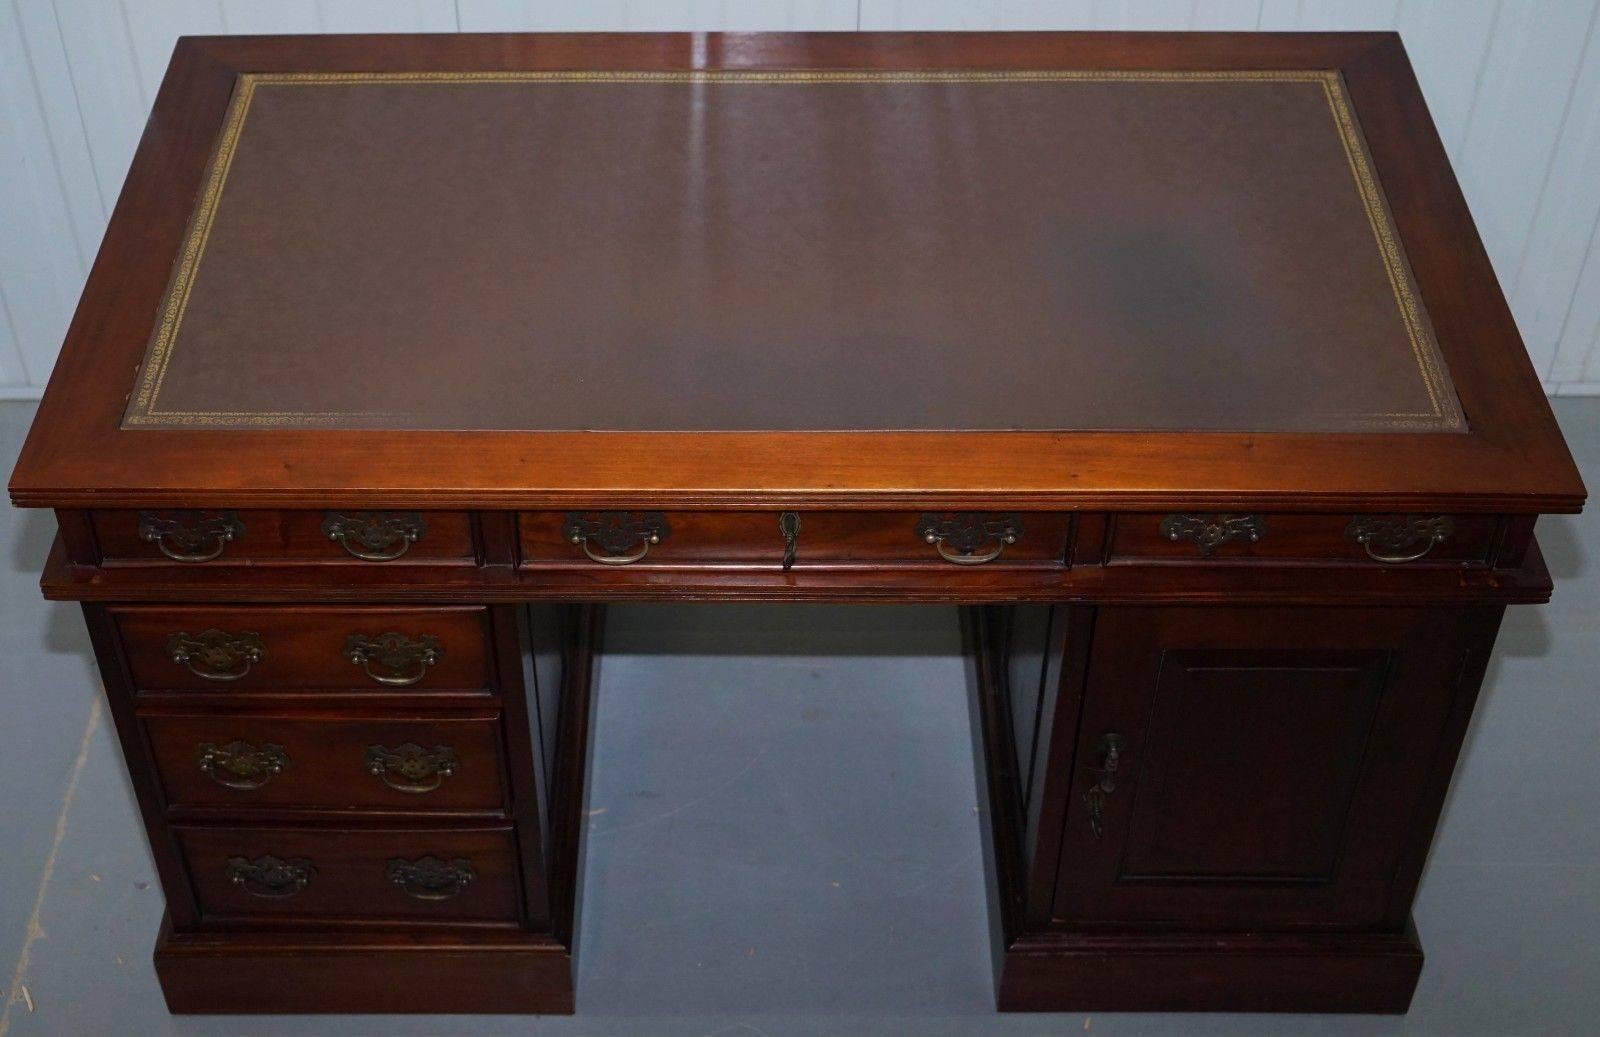 Hand-Carved Solid Mahogany Twin Pedestal Partner Desk Custom Designed to House Computer Pc